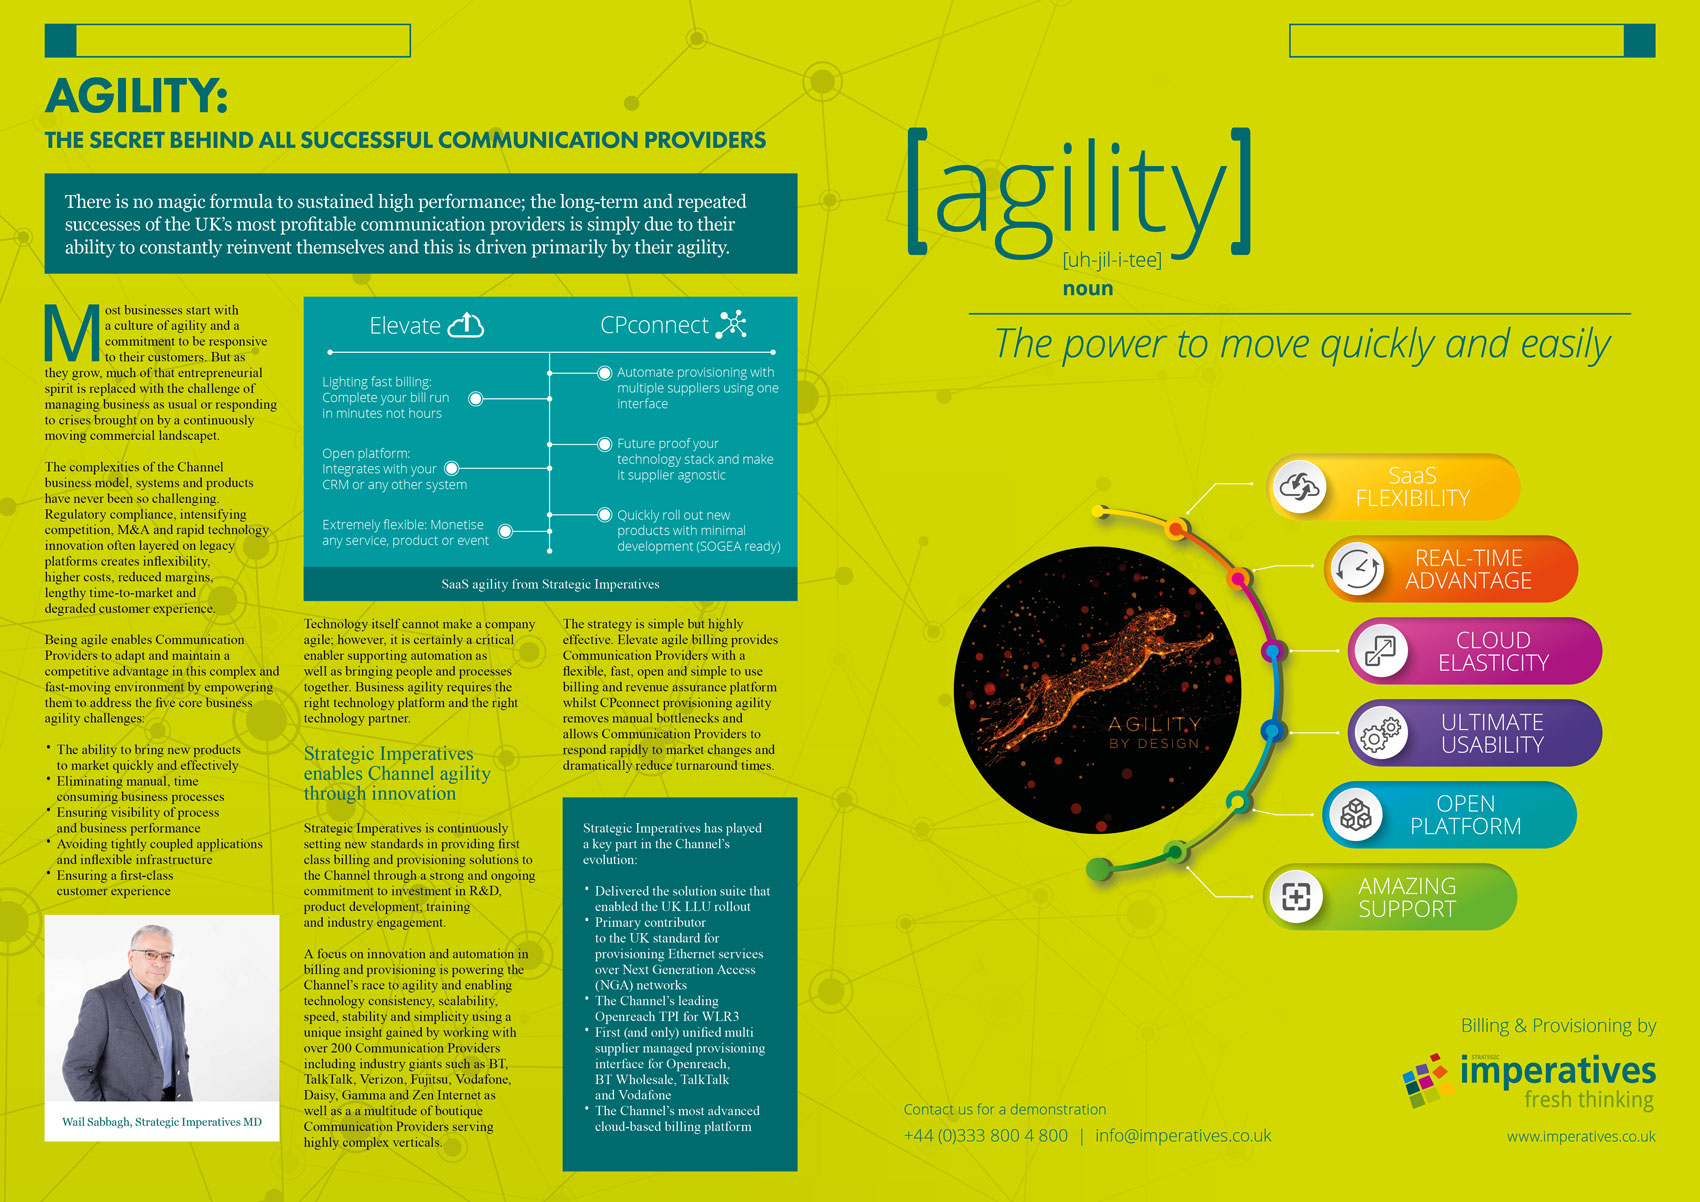 Agility: The secret behind all successful communication providers